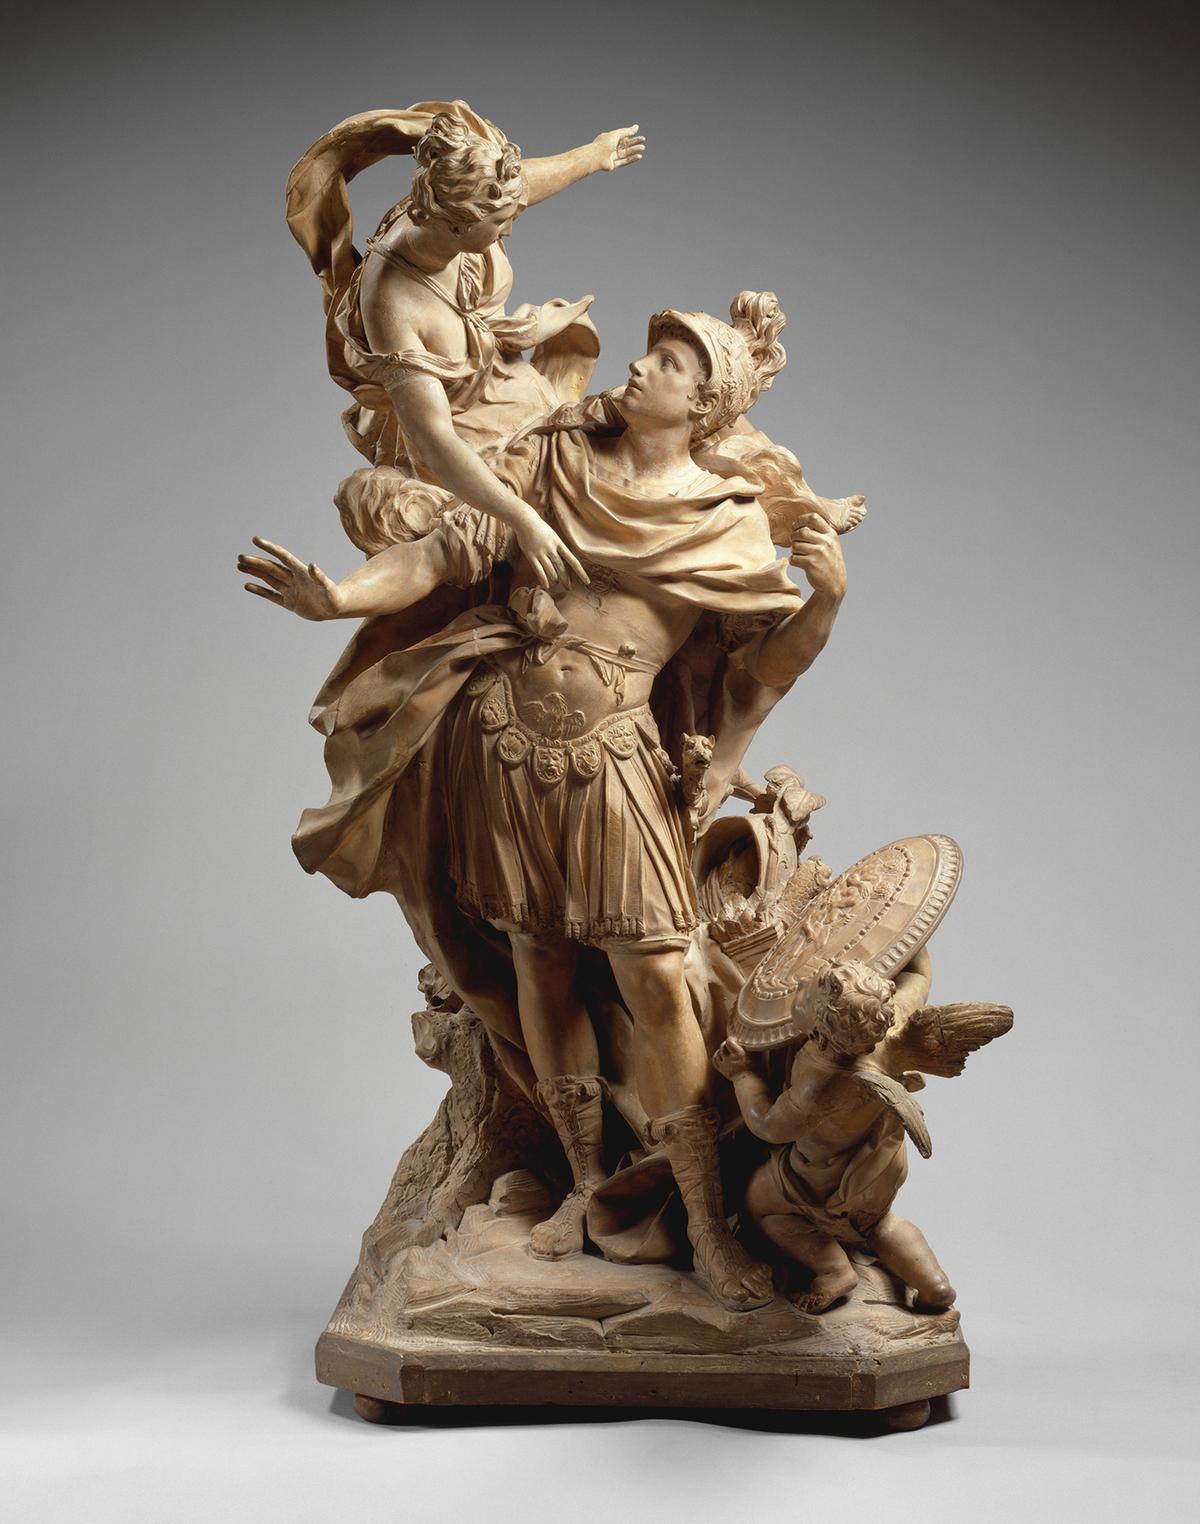 "Venus Giving Arms to Aeneas," 1704, by Jean Cornu. Terracotta and painted wood sculpture. The Metropolitan Museum of Art, New York. (Public Domain)